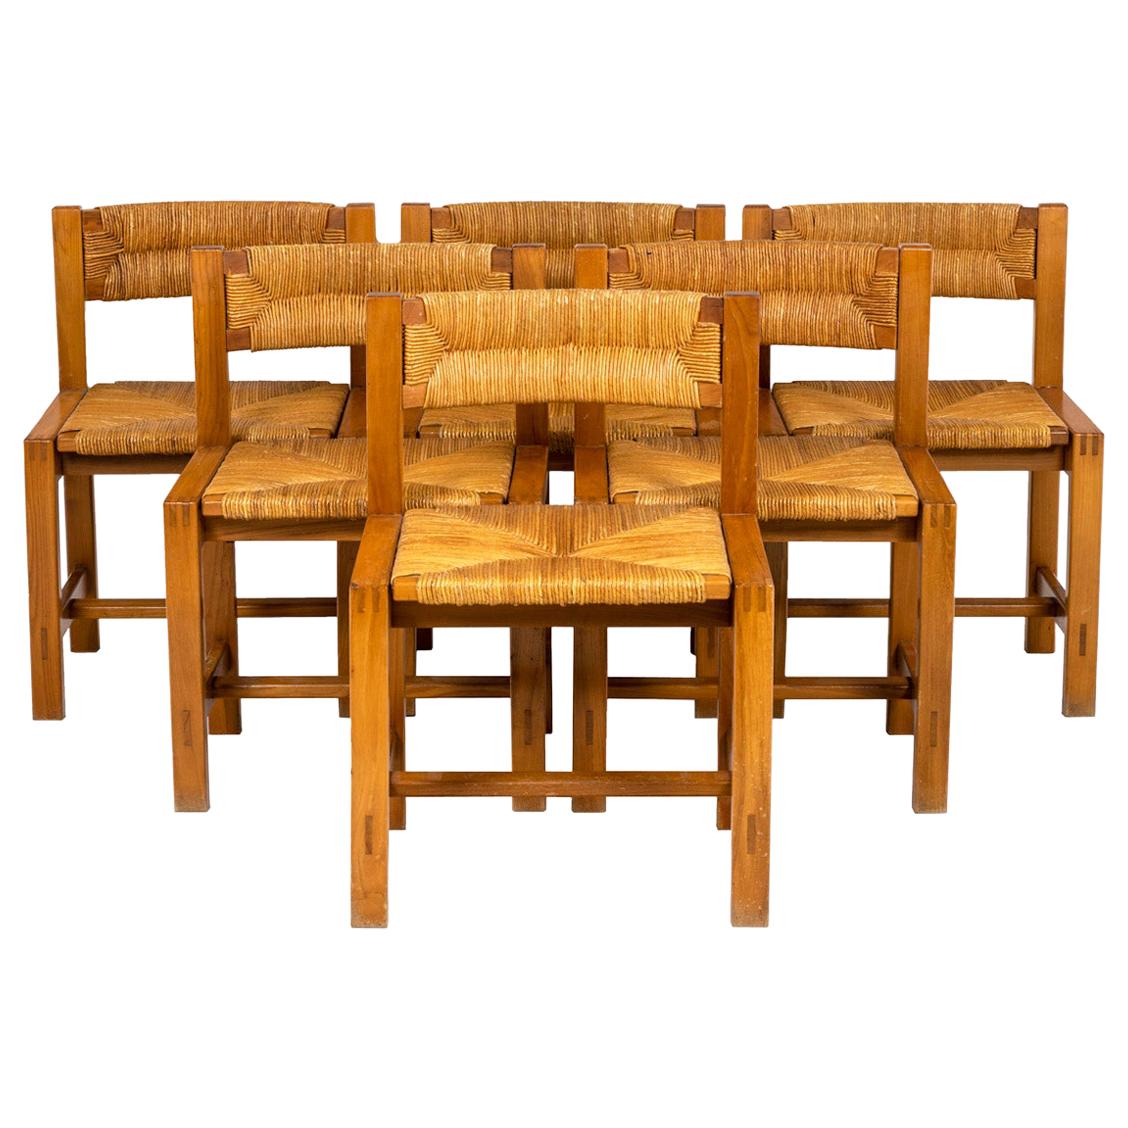 Maison Regain, Series of Six Chairs in Elm and Straw, 1960's